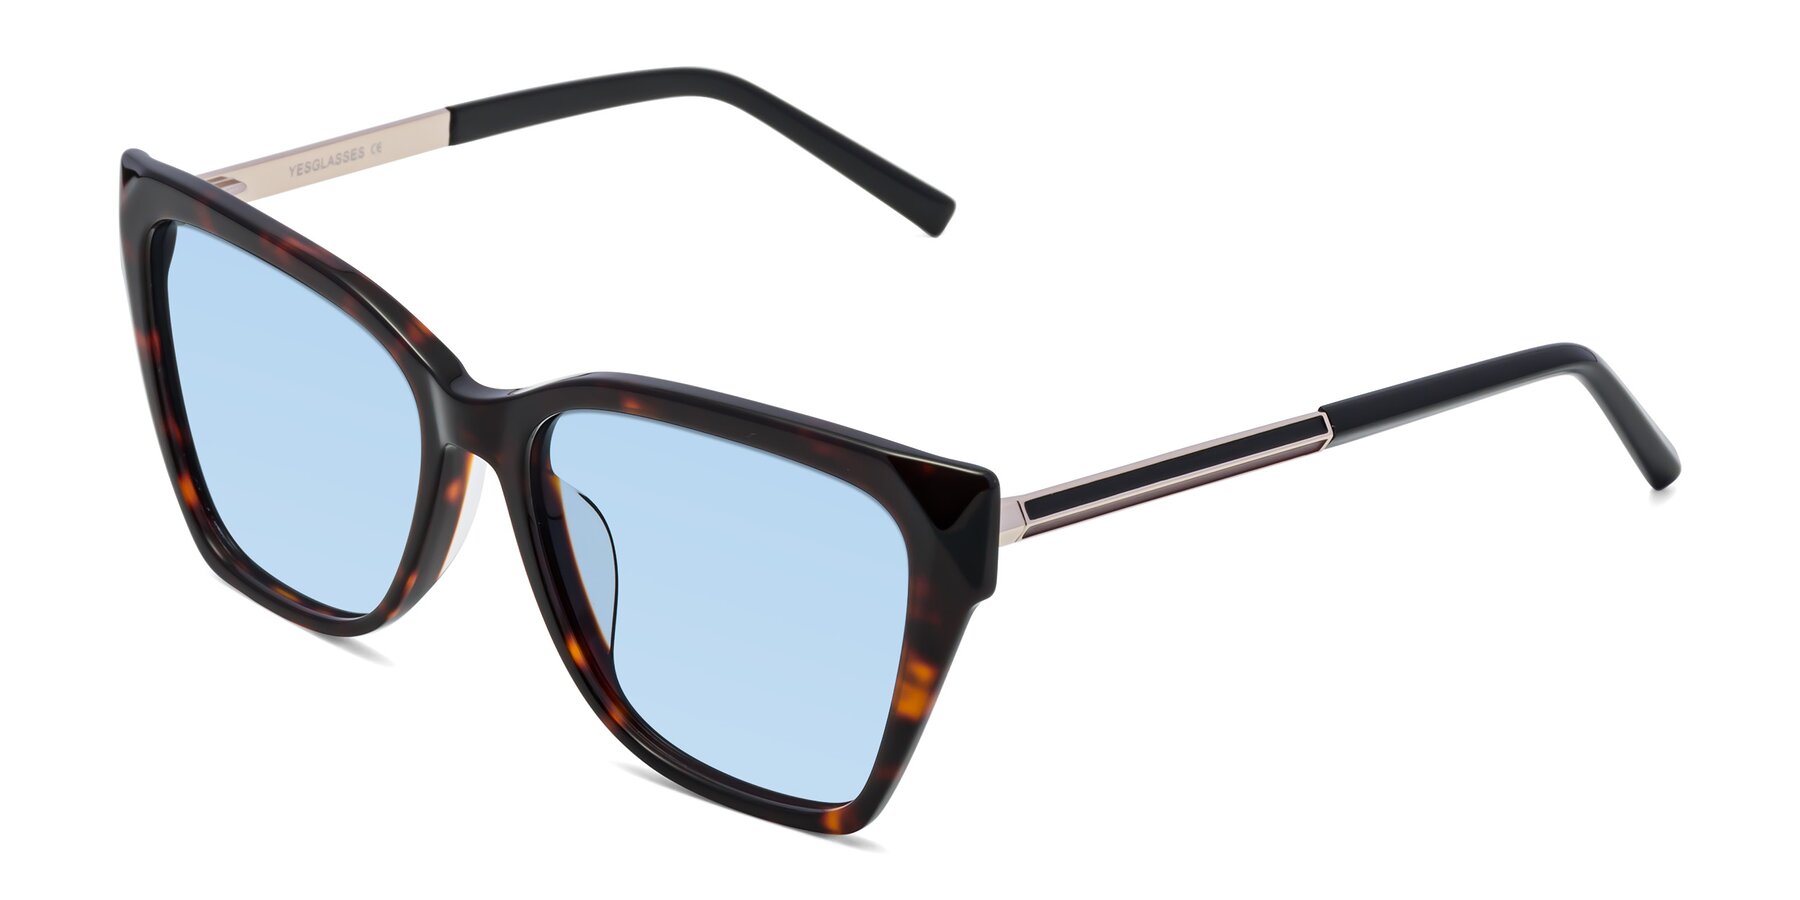 Angle of Swartz in Tortoise with Light Blue Tinted Lenses